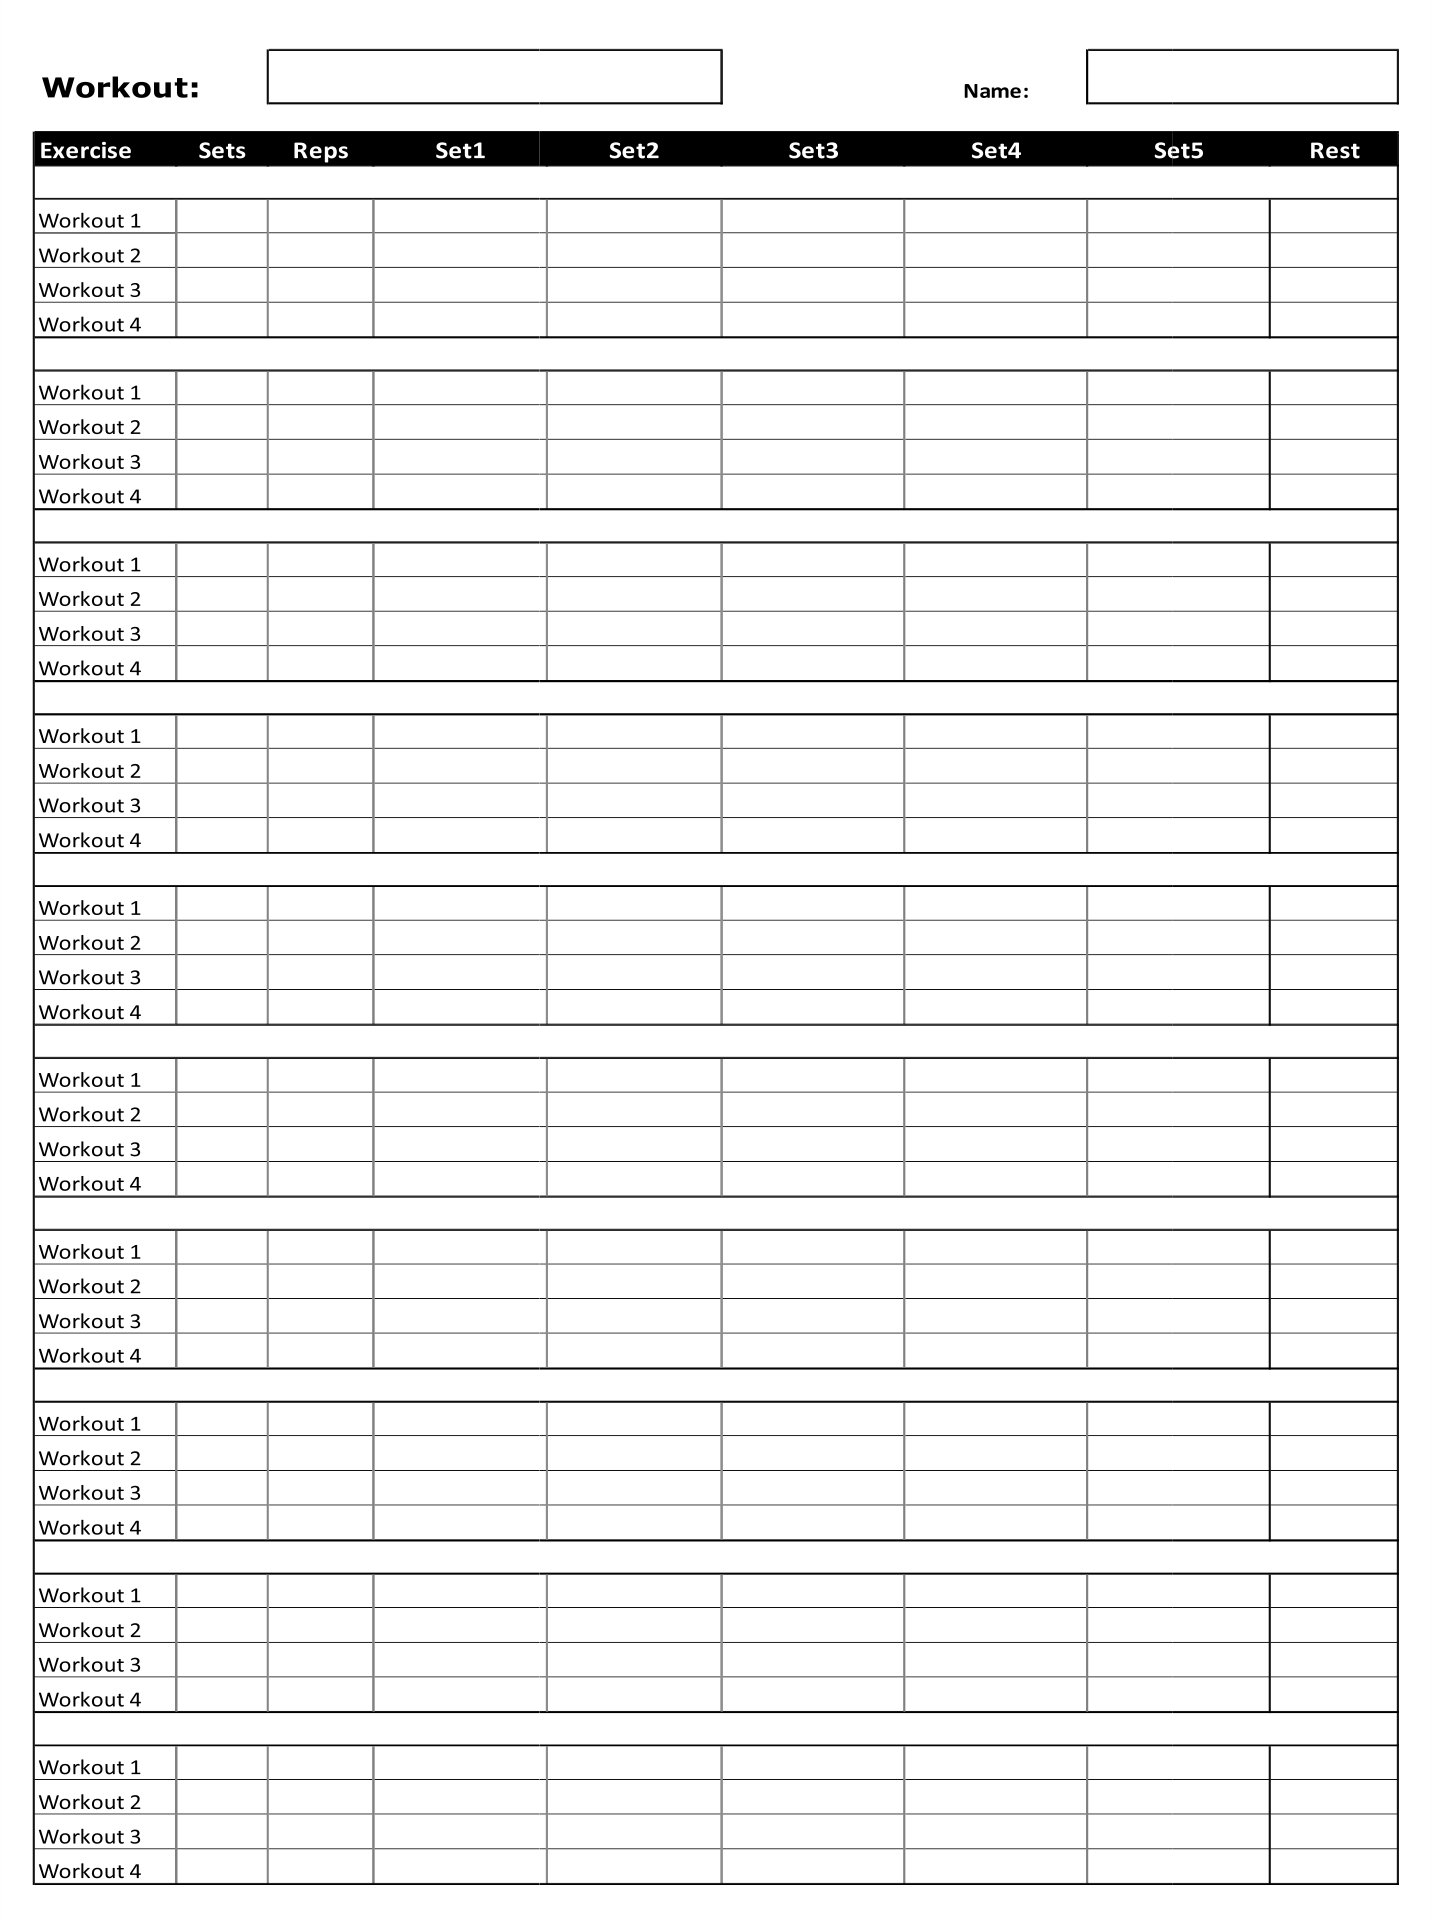 responsibility-chart-template